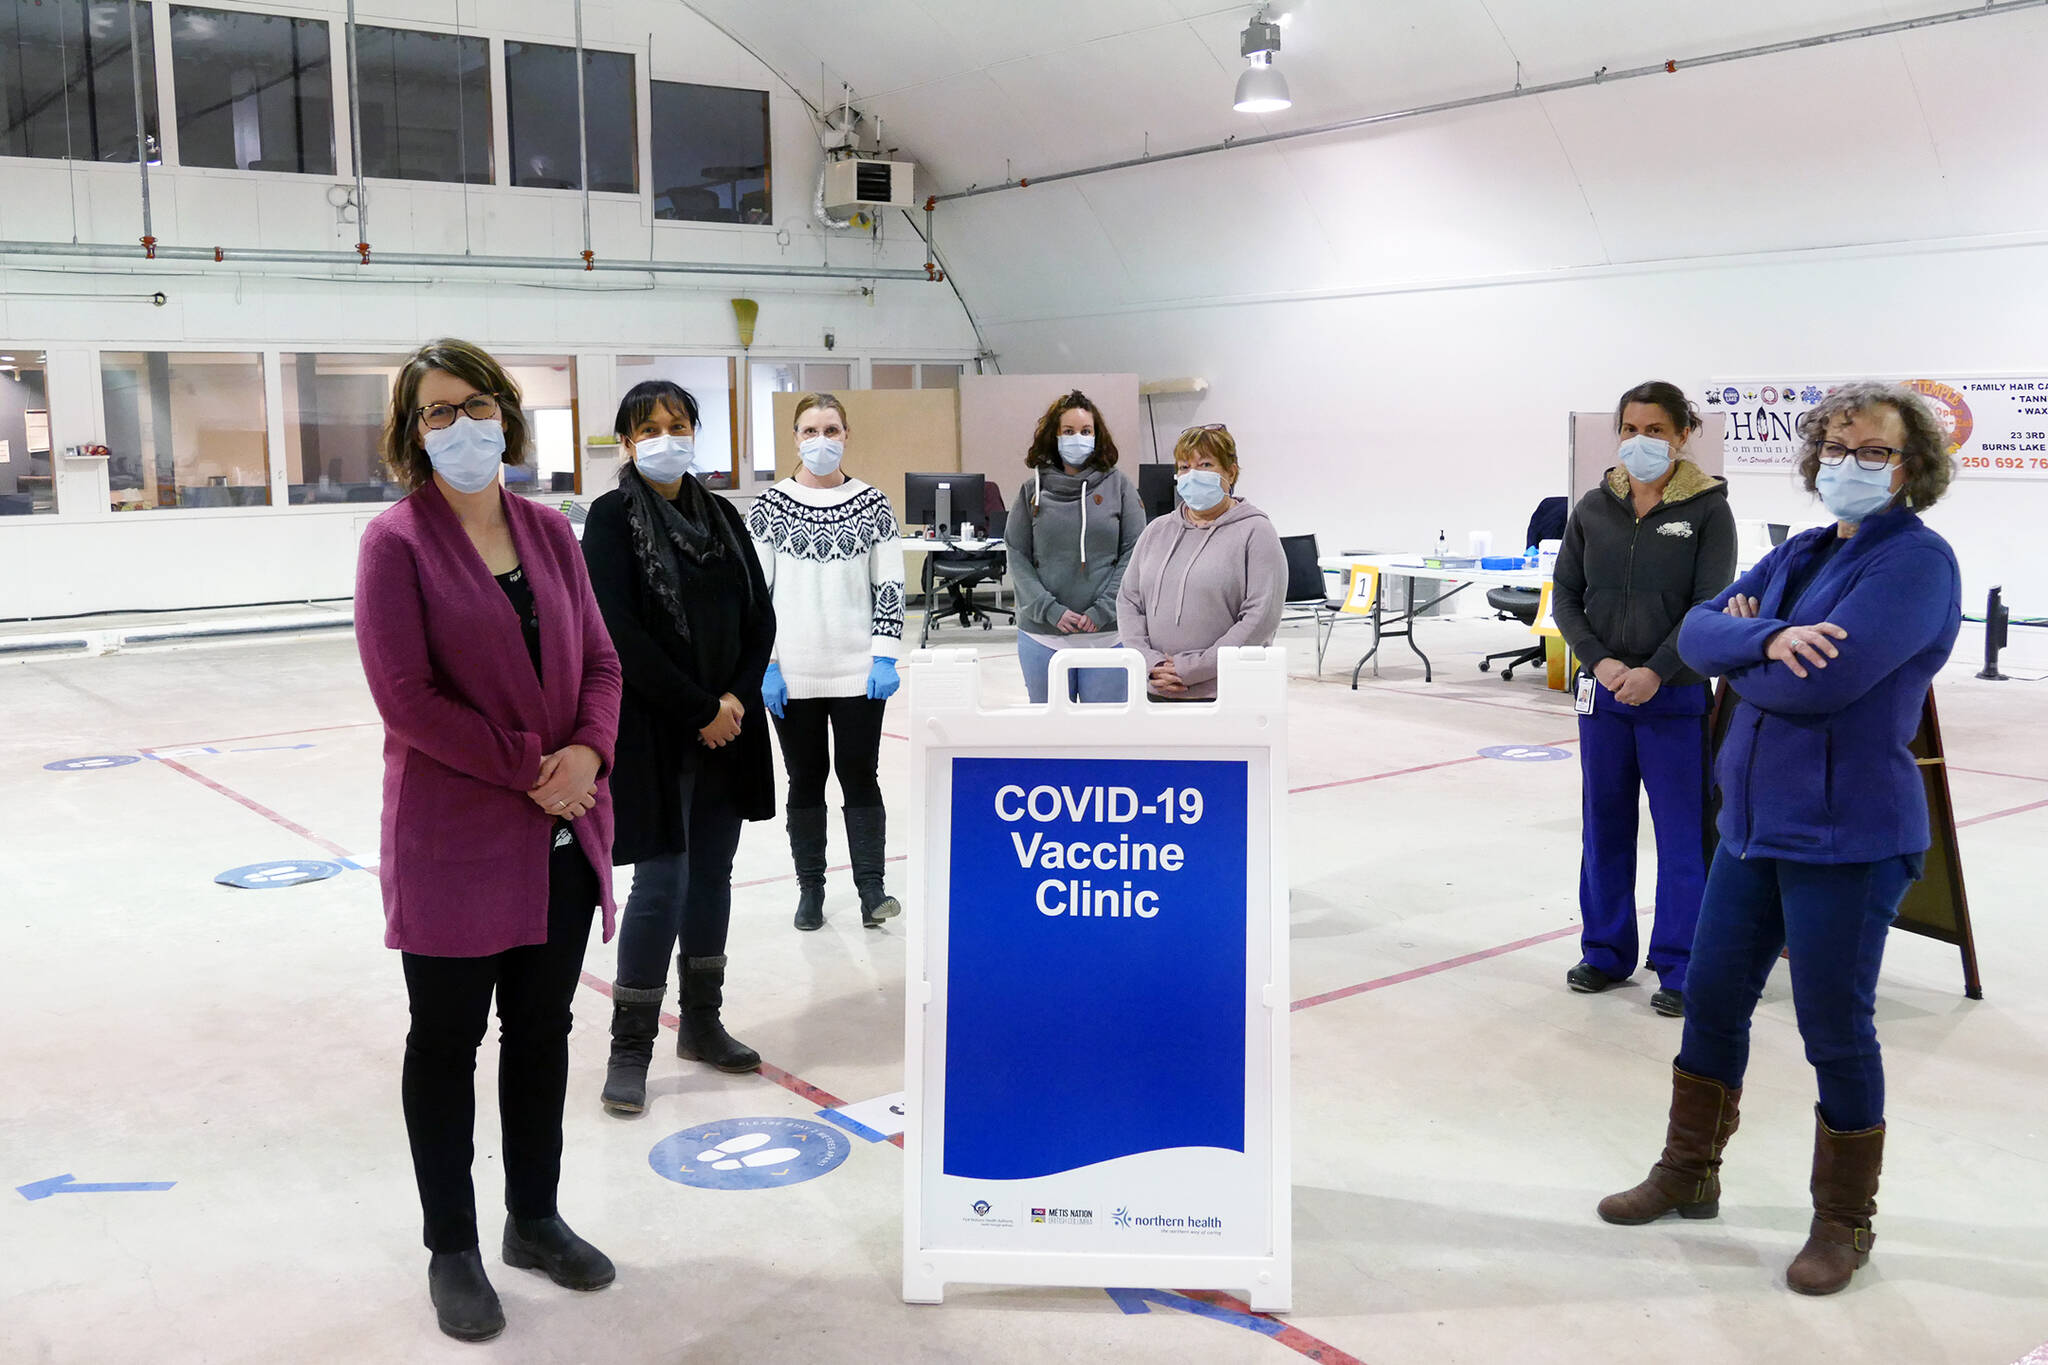 Northern Health staffers and volunteers at community COVID-19 vaccination clinic, at the arena in Burns Lake B.C., March 2021. Northern B.C. continues to have lower vaccination rates than the rest of the province, and higher virus transmission. (Priyanka Ketkar/Lakes District News)